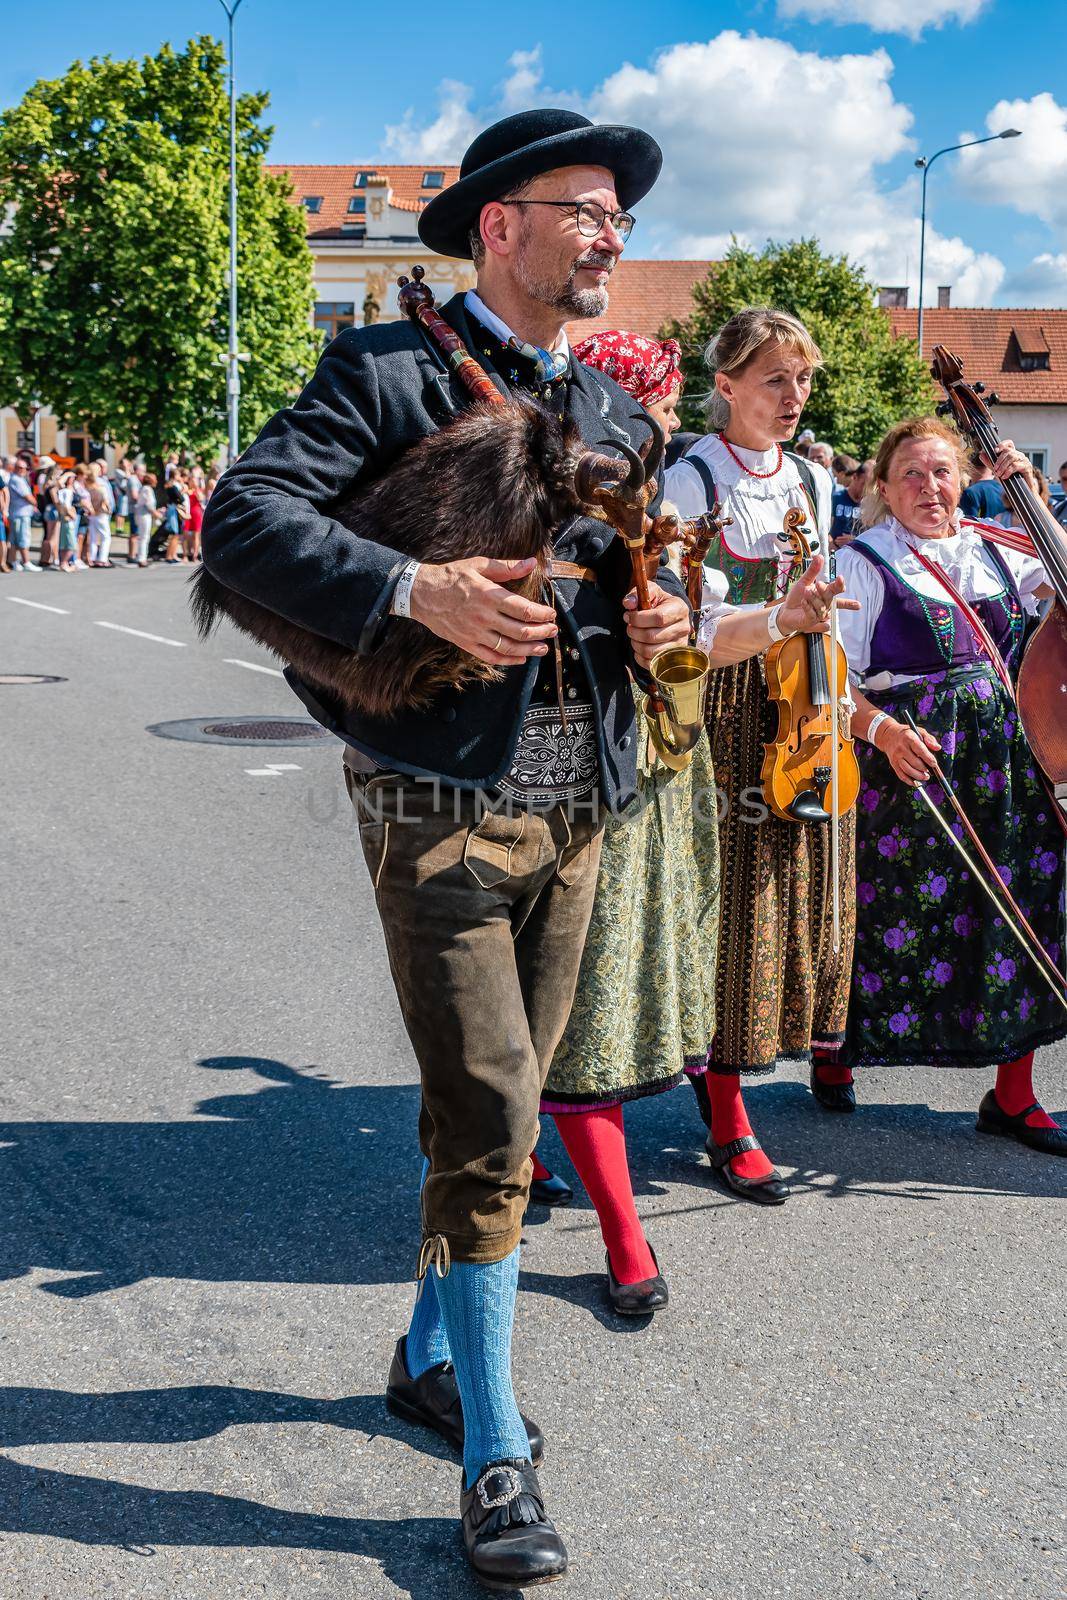 Straznice, Czech Republic - June 25, 2022 International Folklore Festival. Woodpecker playing at the festival in Straznice in a procession